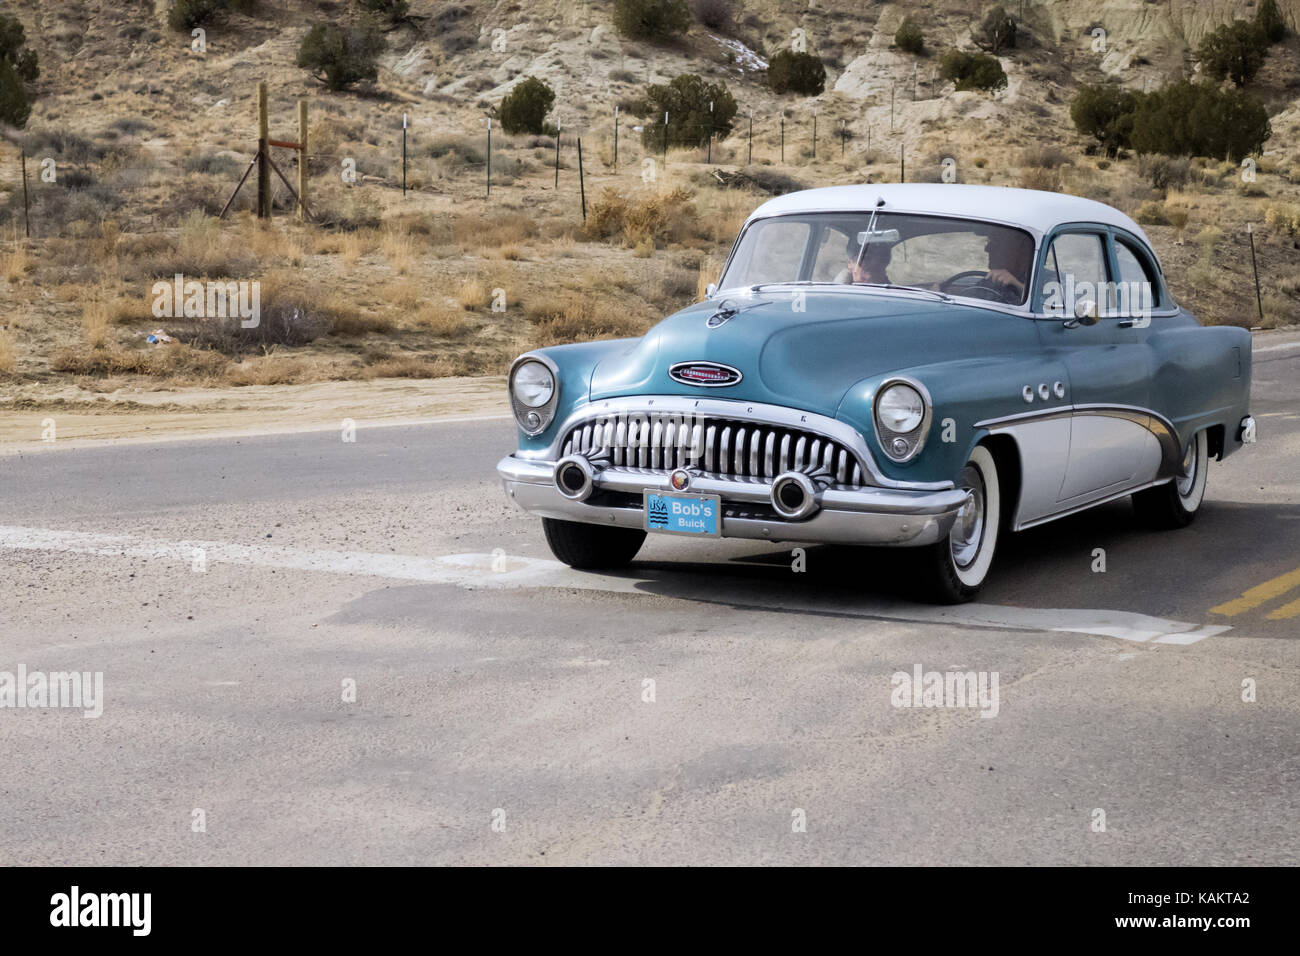 A Galena Blue two tone paint 1951 Buick special waiting at  intersection in the New Mexico desert. Stock Photo